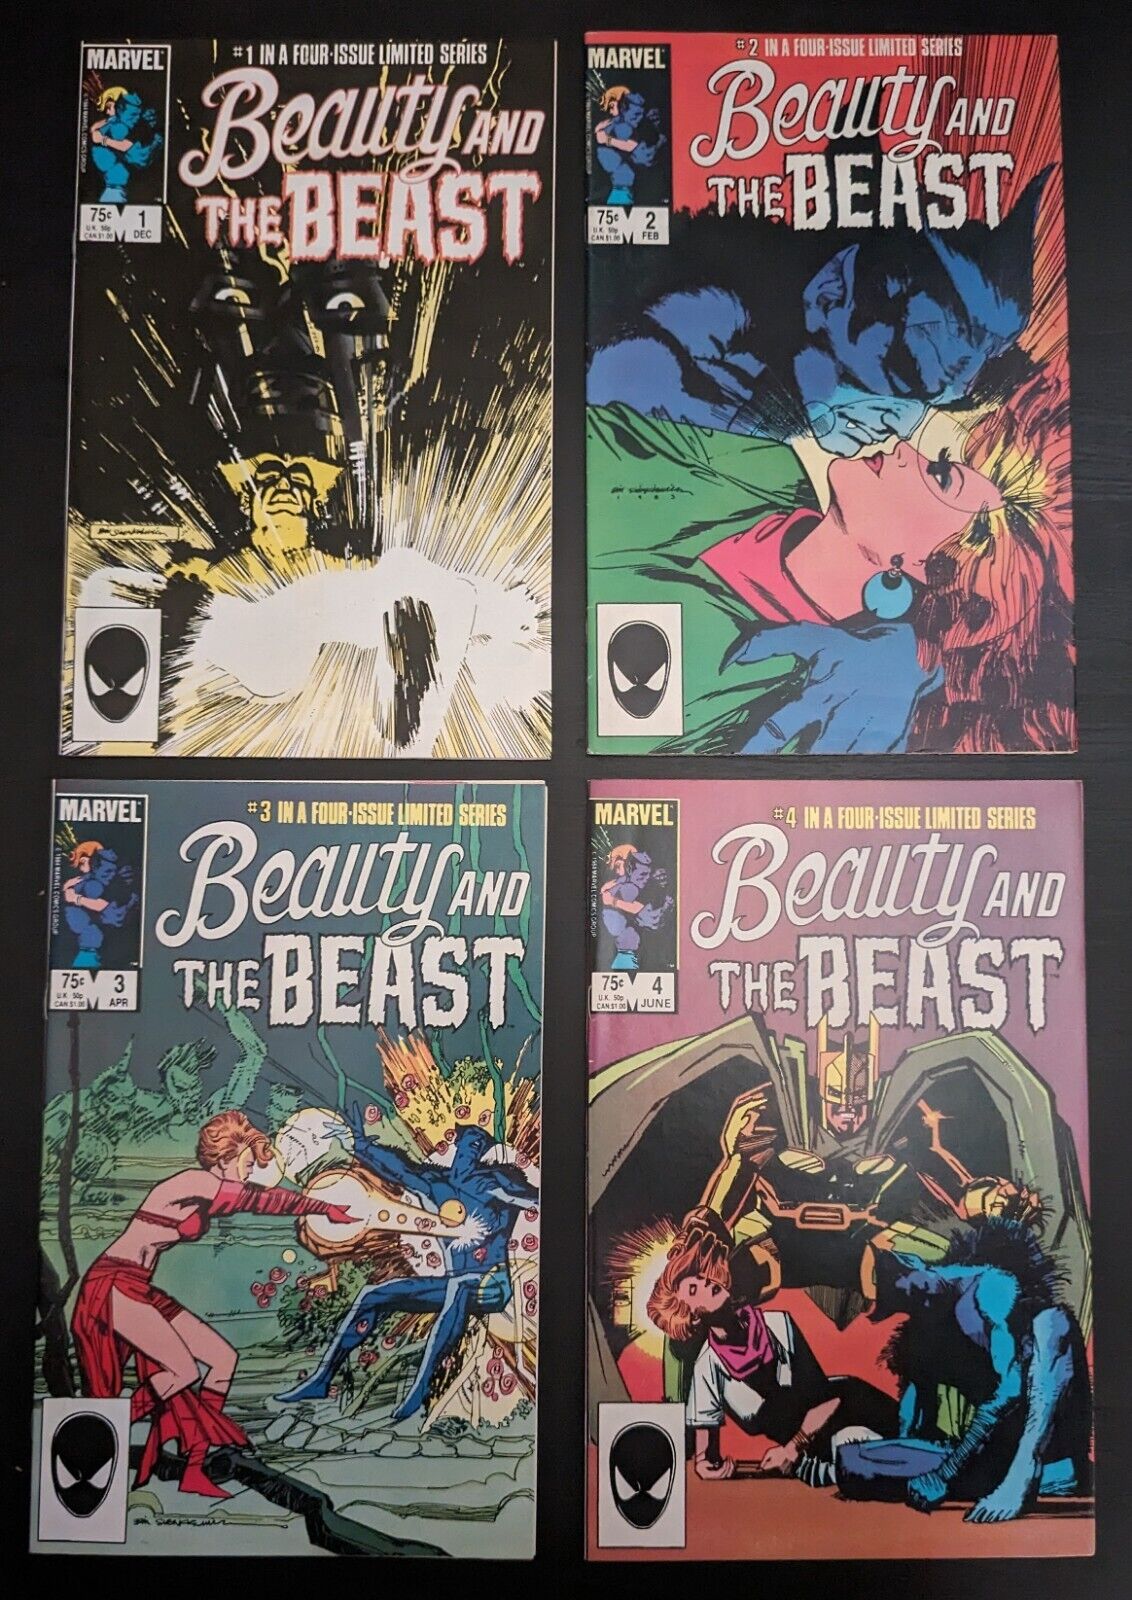 Marvel BEAUTY AND THE BEAST #1-4 CompleteFour Issue Limited Series LOOKS GREAT